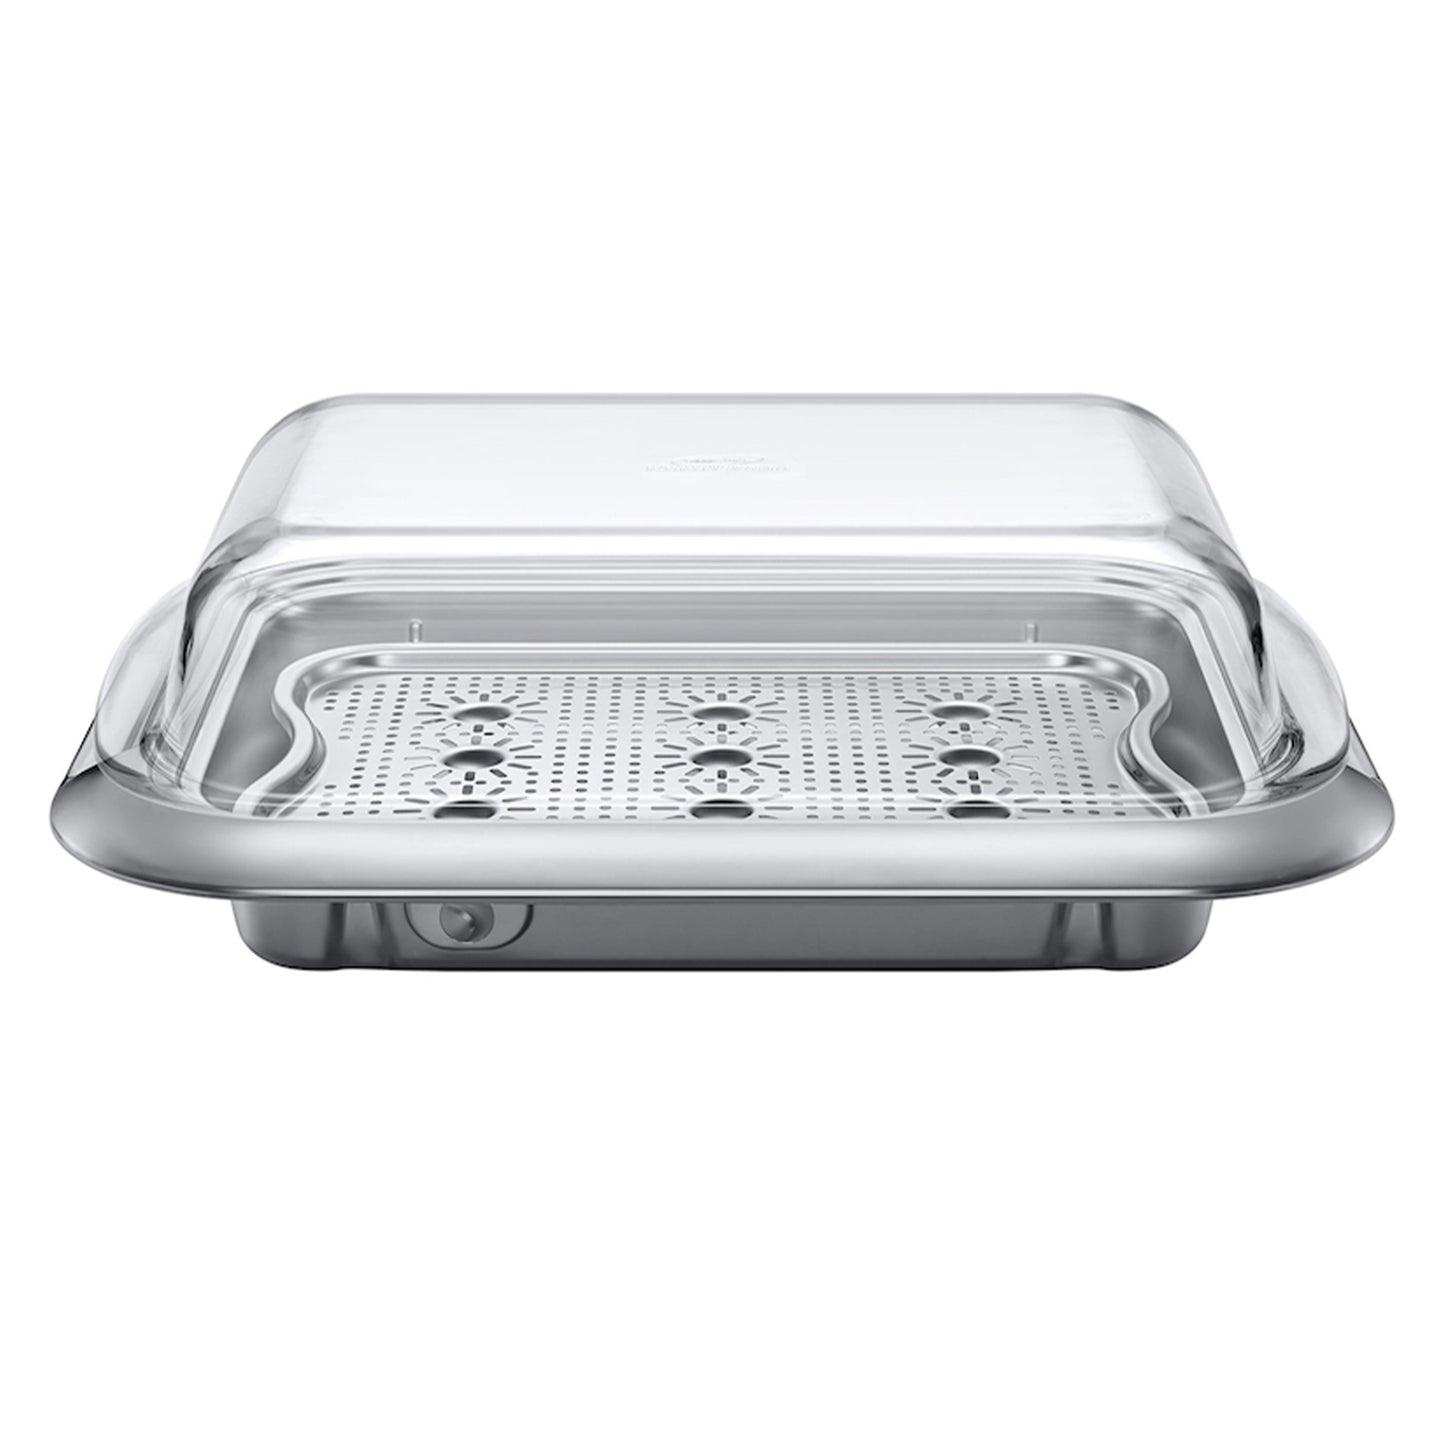 Steam Cook Plus Tray in Stainless Steel